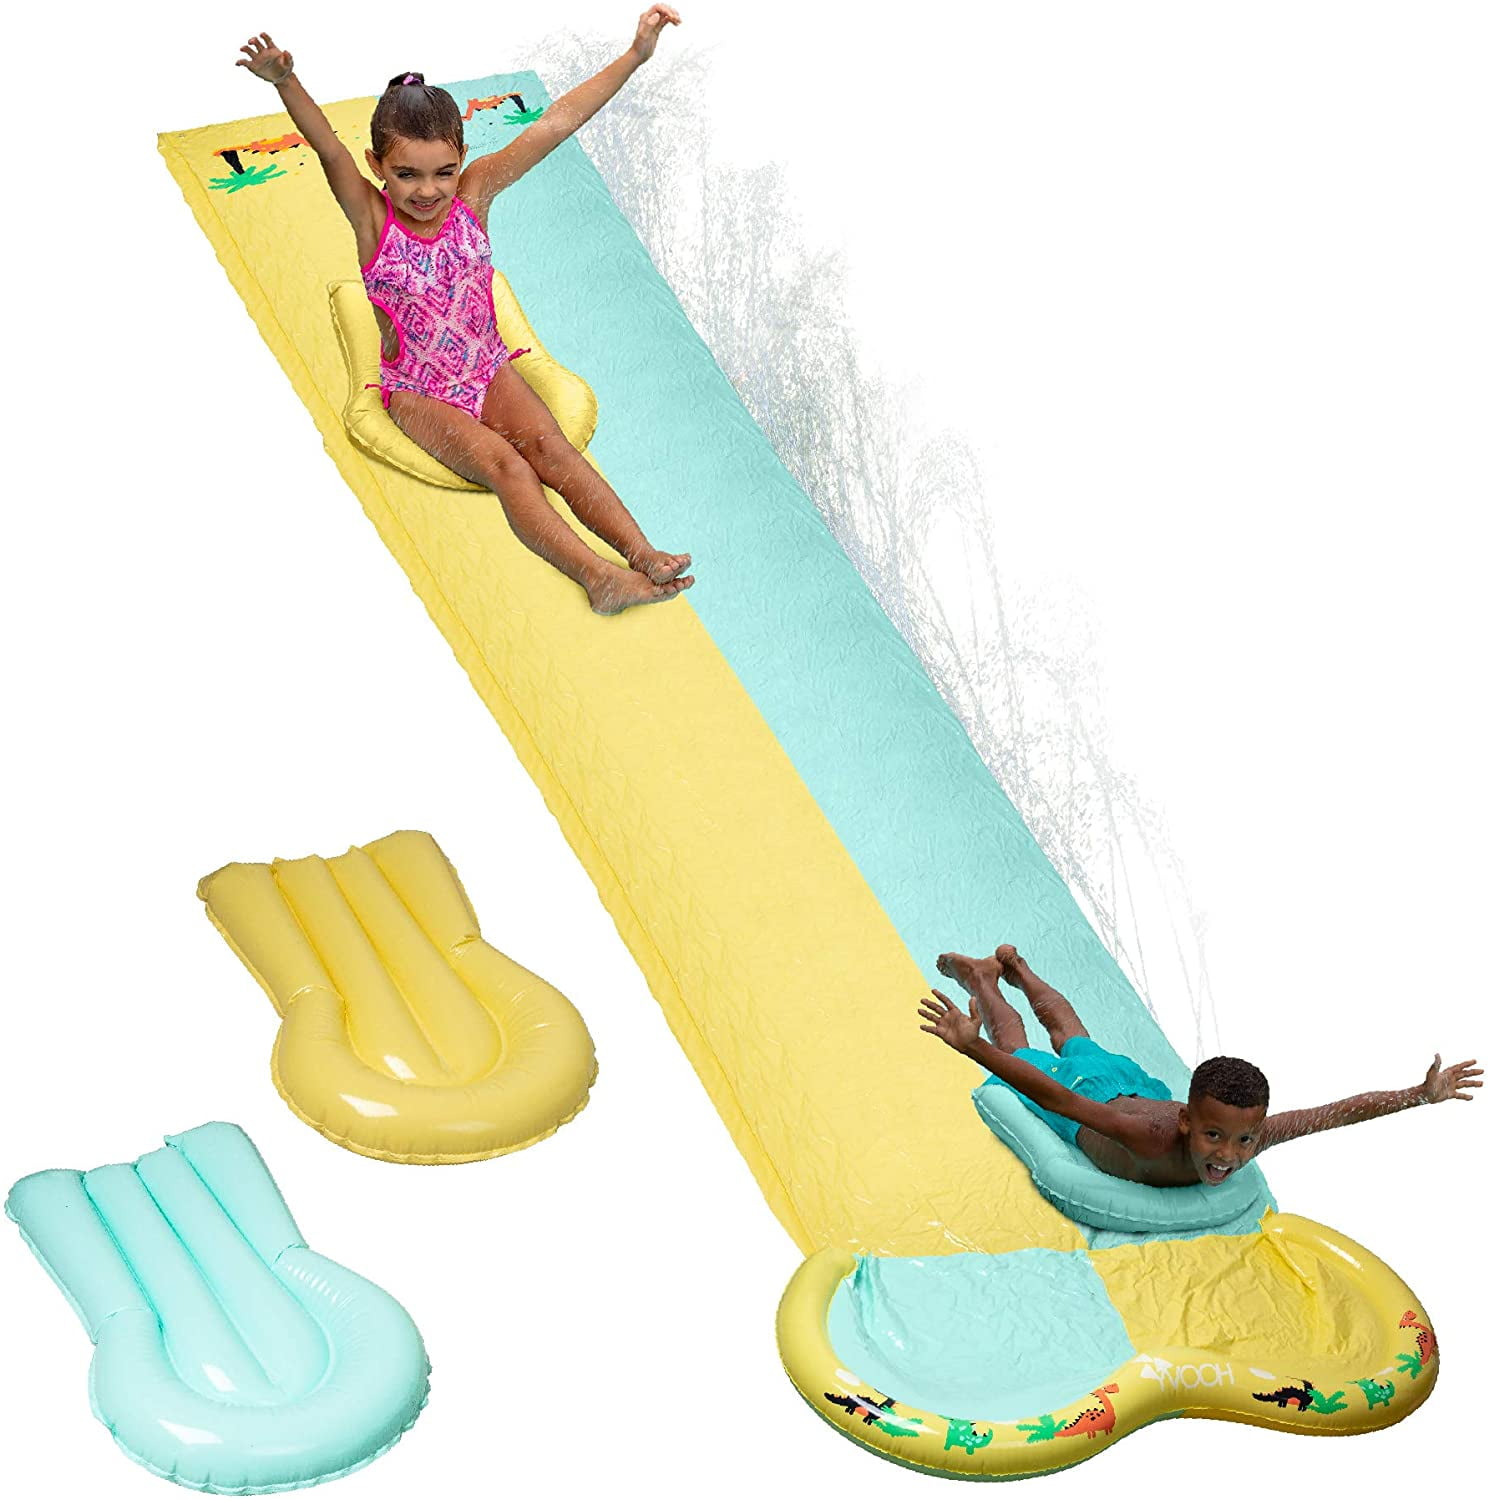 Slip N Slide Outdoor Inflatable Play Bounce Water 18' XL Speed Ramp Summer Toy 